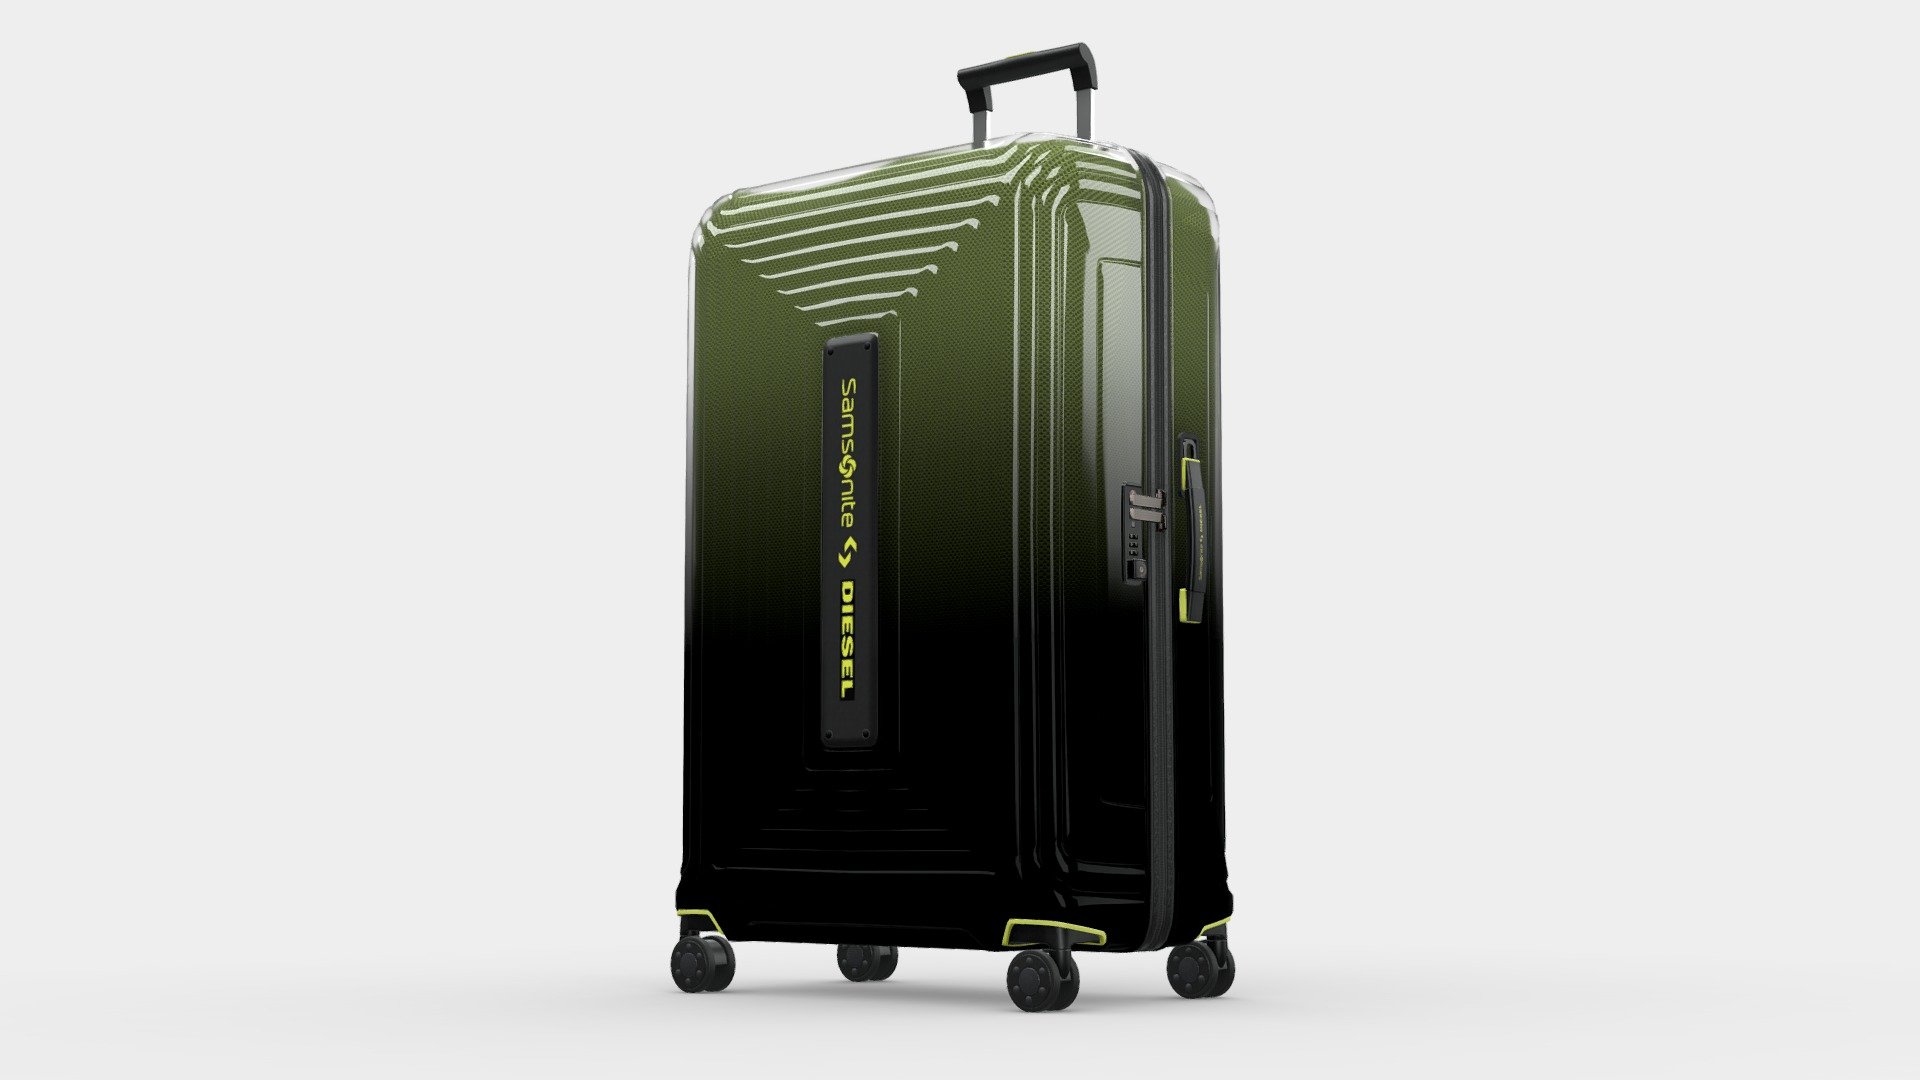 Trolley Samsonite Diesel model
Game and VR ready for high-quality Visualization - Trolley Samsonite Diesel - 3D model by Invrsion 3d model